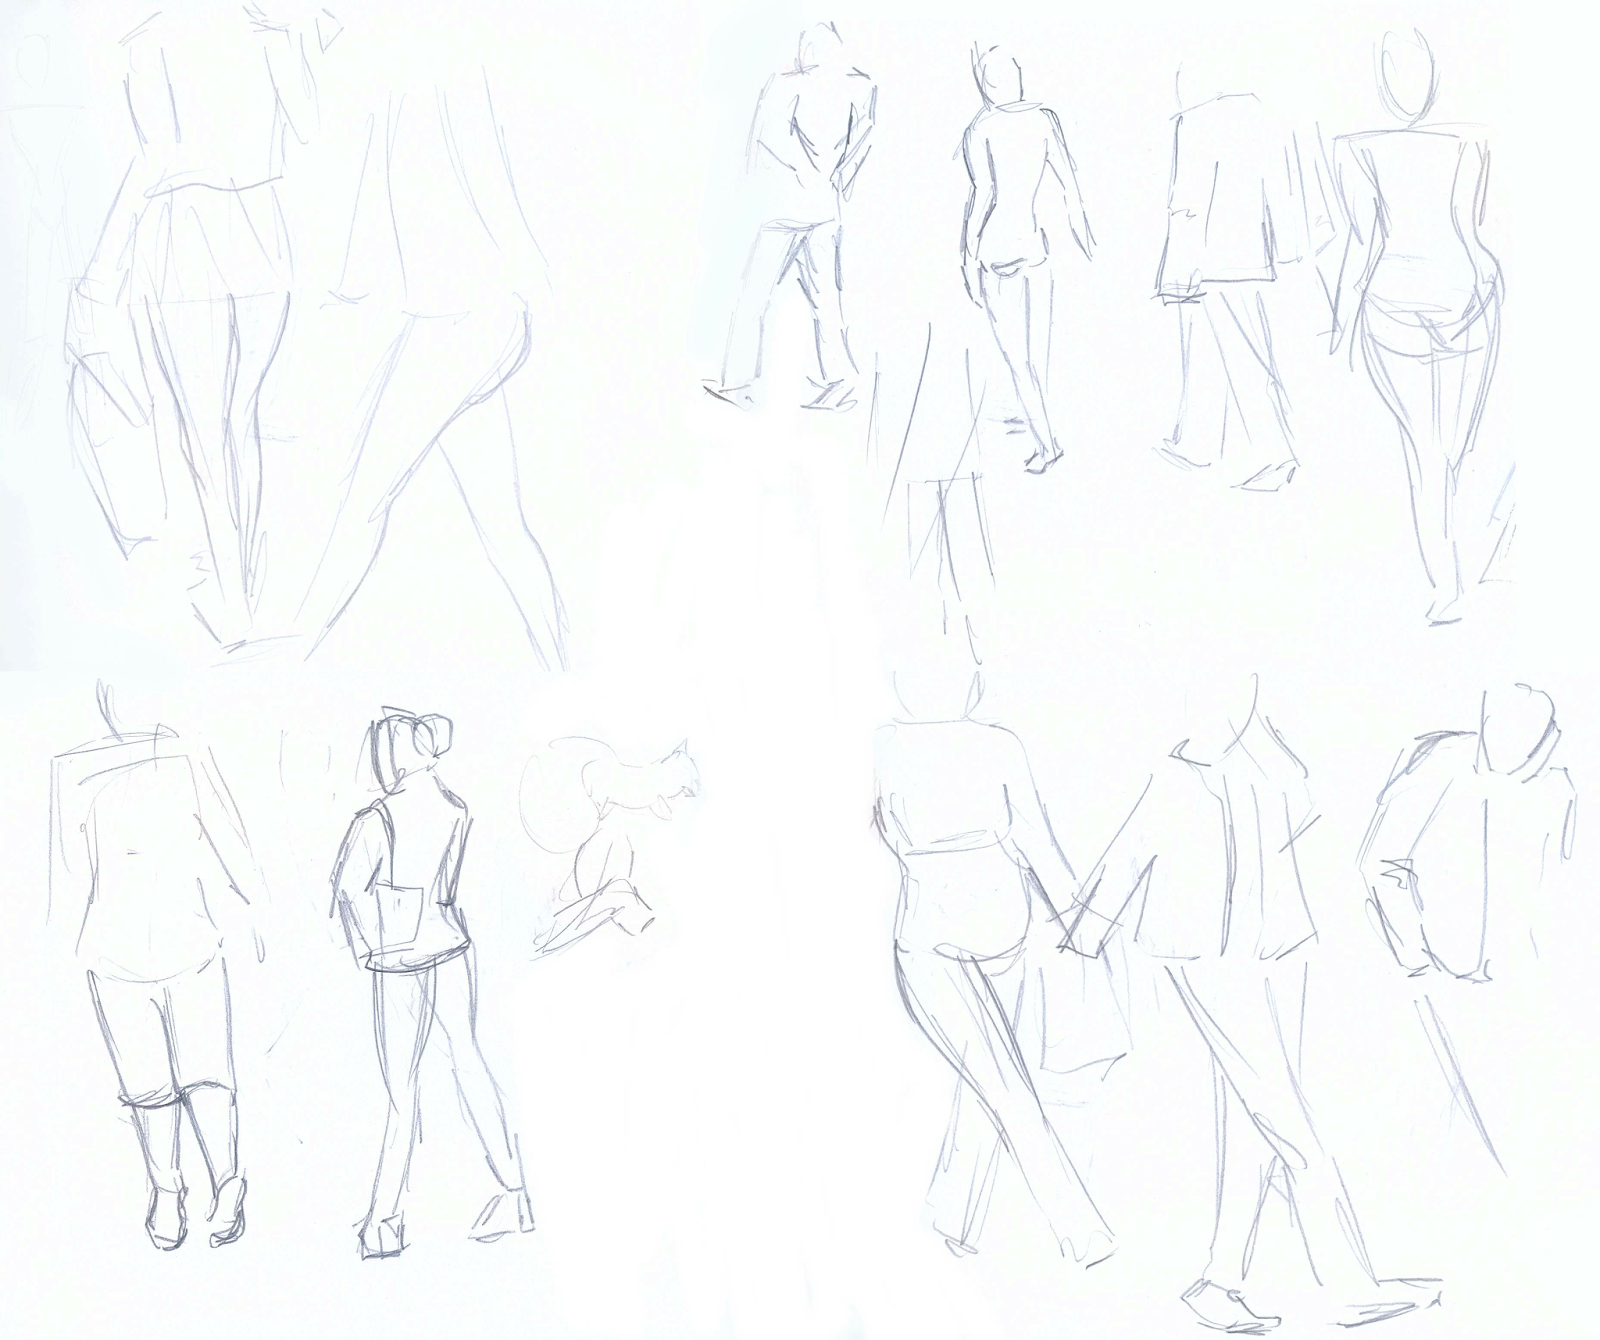 Drawing Journal and Major Project Planning: Moving Figure Drawing